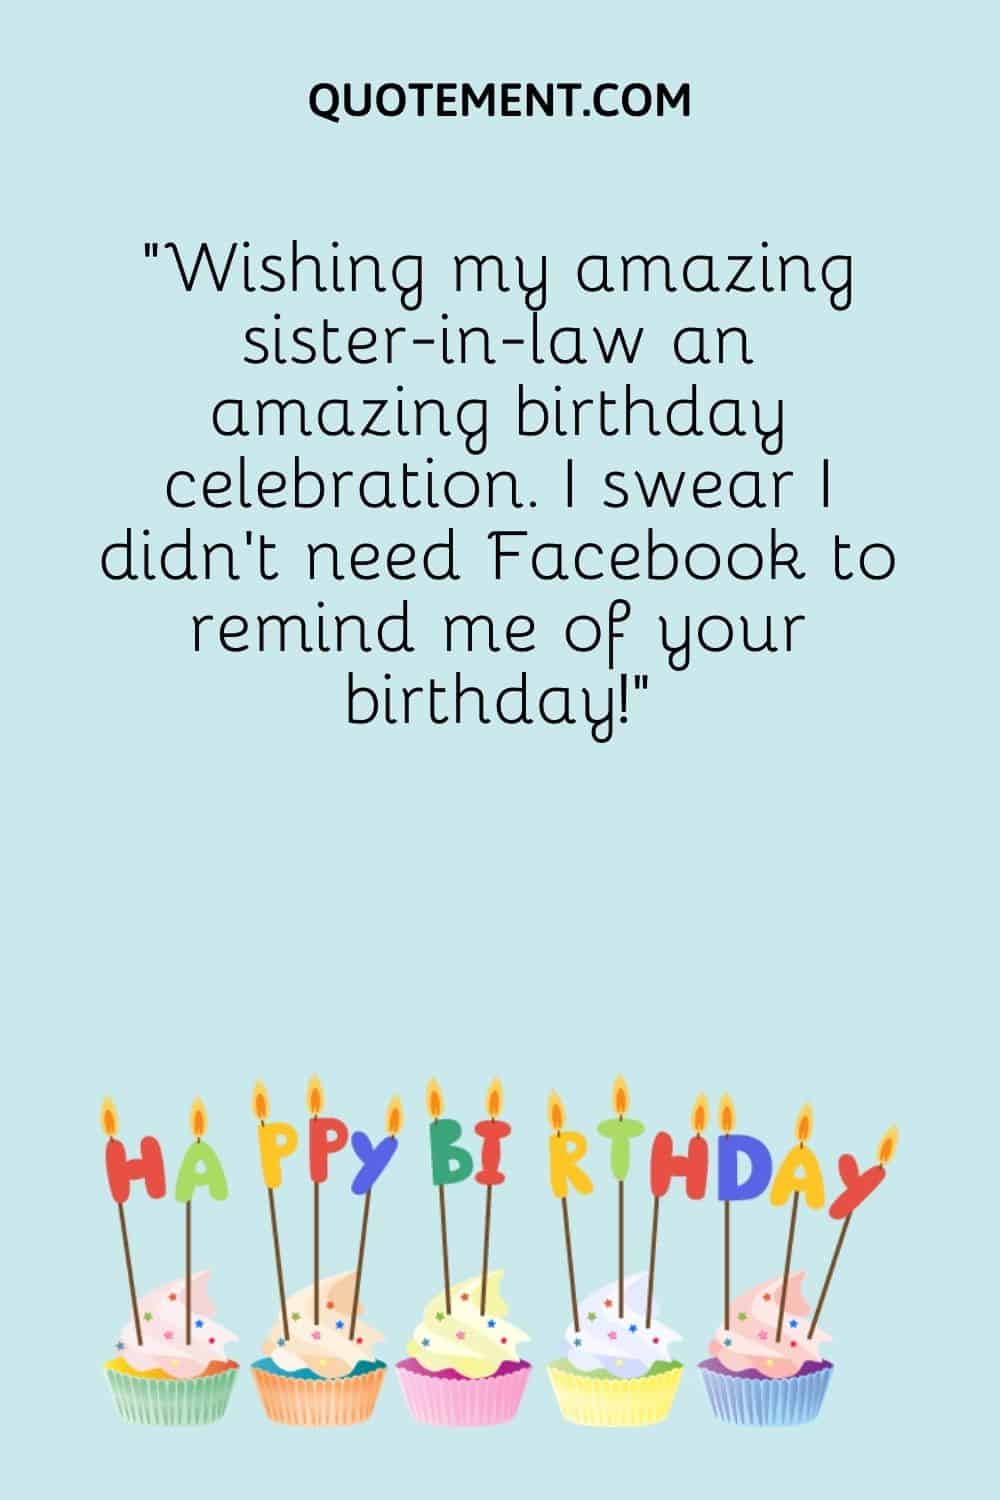 Wishing my amazing sister-in-law an amazing birthday celebration. I swear I didn’t need Facebook to remind me of your birthday!”